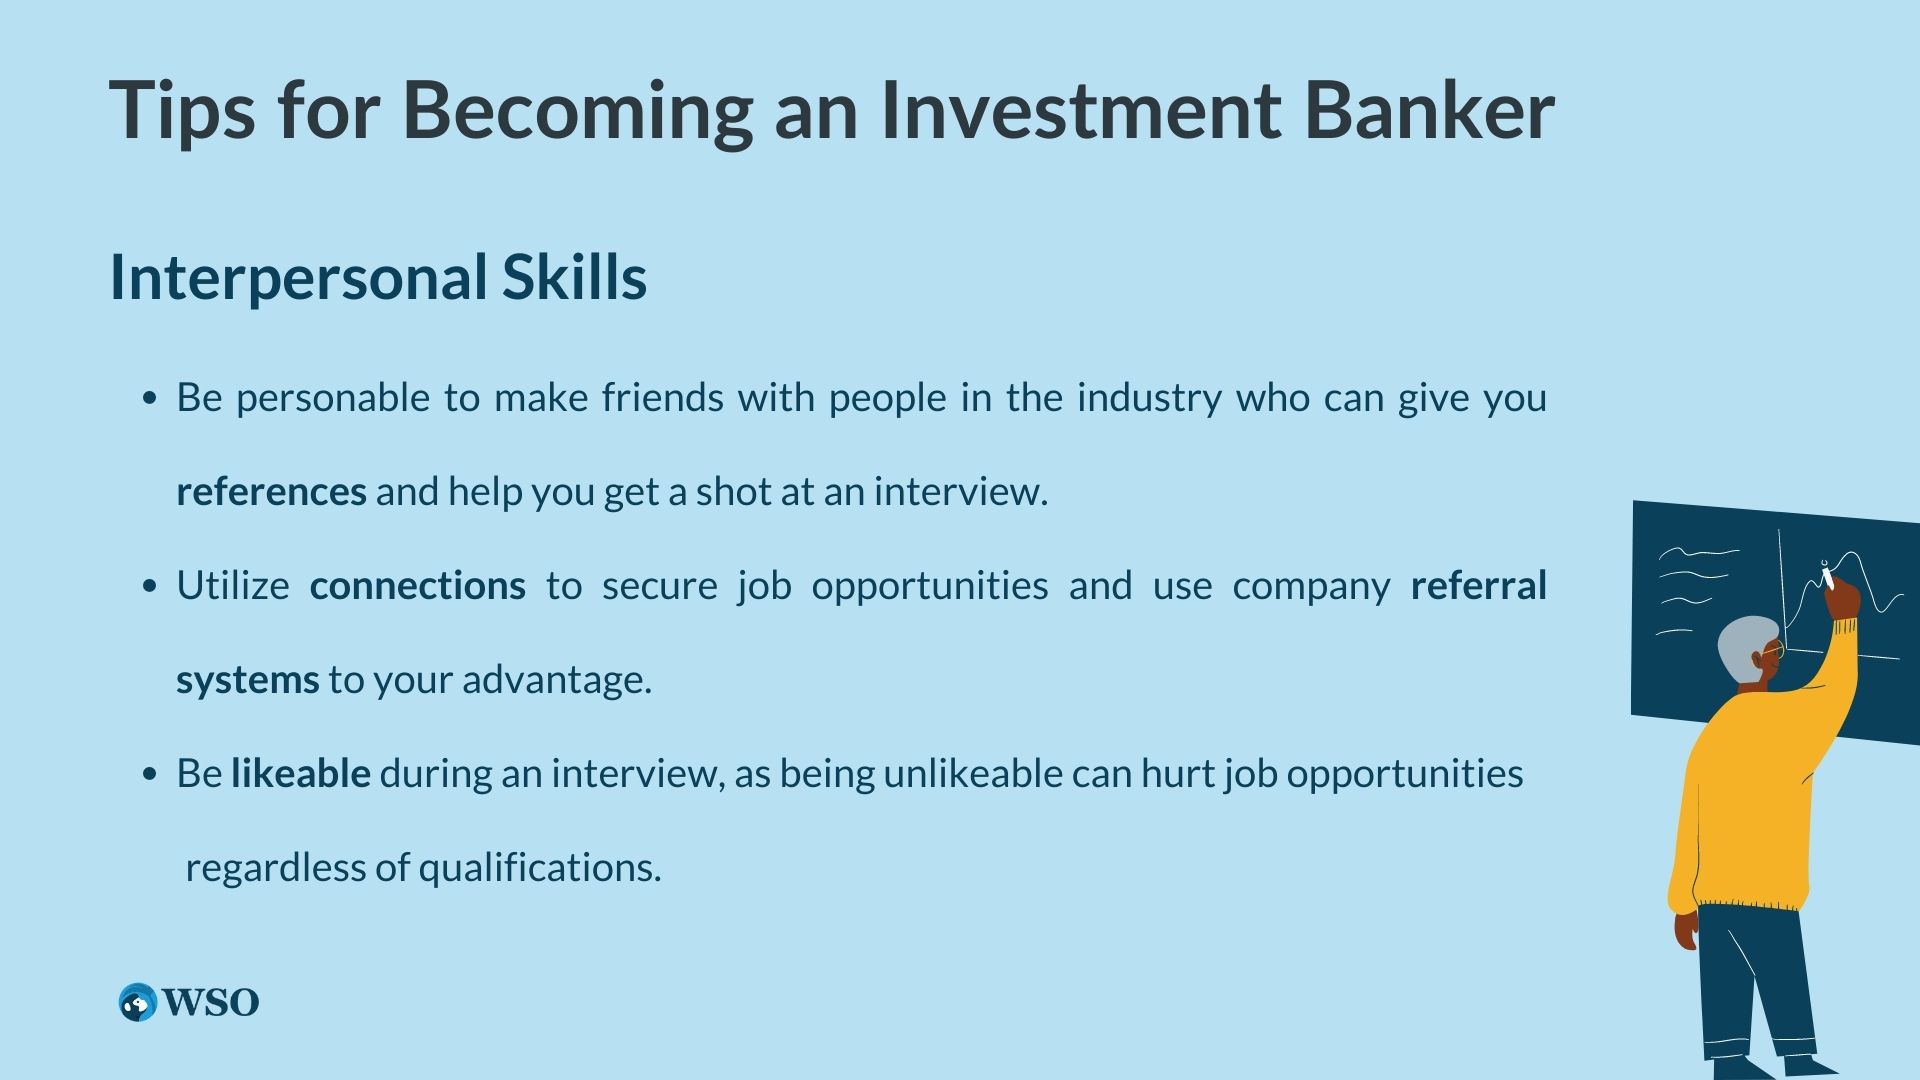 Interpersonal Skills Tips for Becoming an Investment Banker